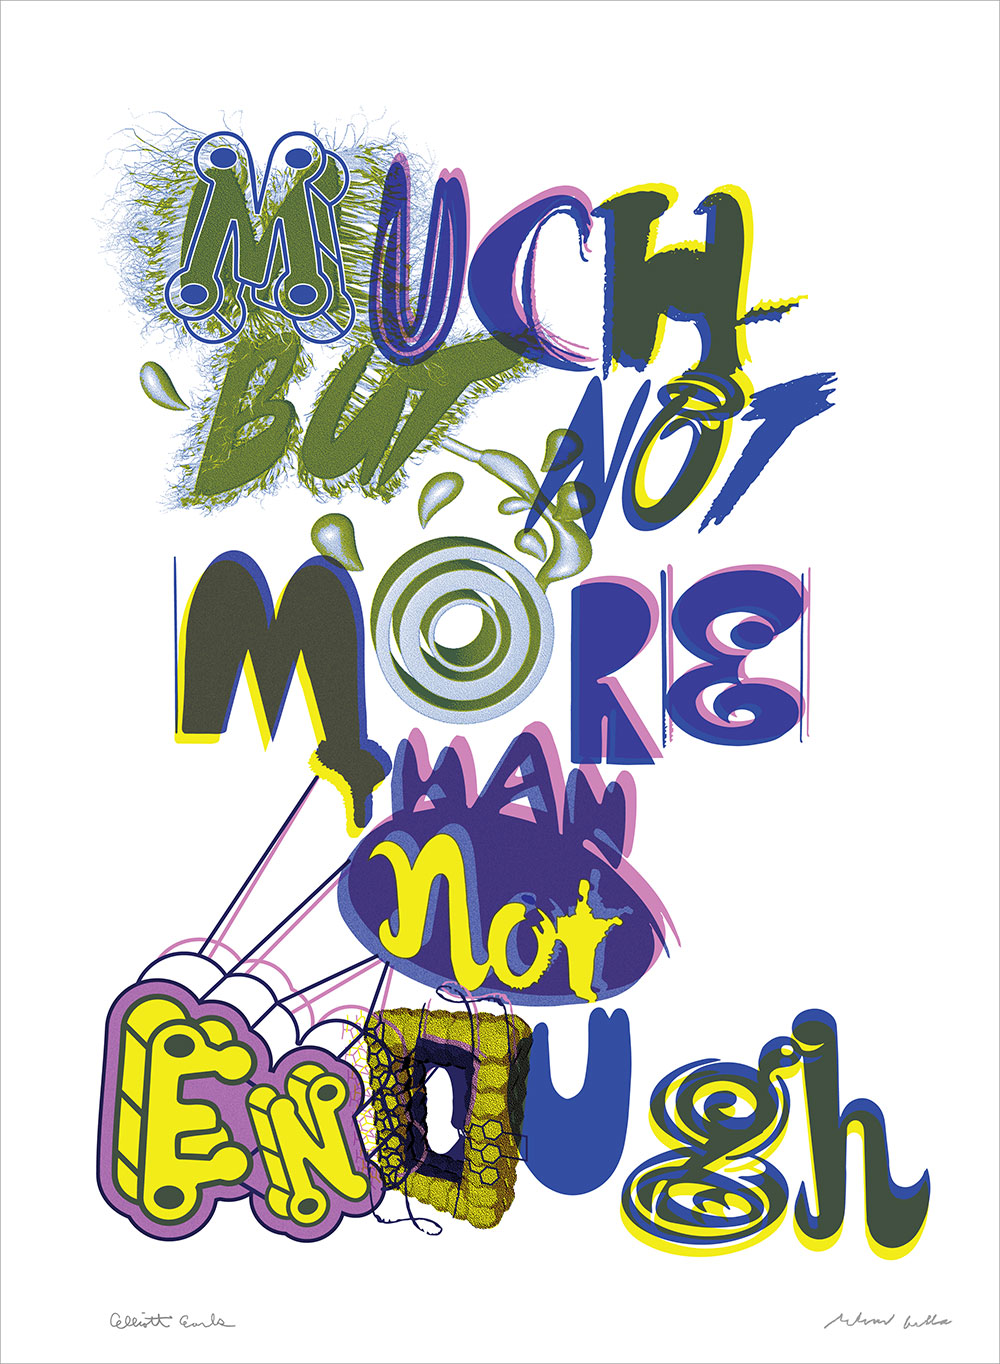 "Much But Not More Than Not Enough. 2017"
Elliott Earls and Ed Fella Print Collaboration.
22x30"
Rives BFK Heavyweight 100% Cotton Paper 250gsm with Deckle Edge.
Edition of 20.
Signed and Numbered.
Blind Embossed with Cranbrook Seal.
3 Spot Color
2017.